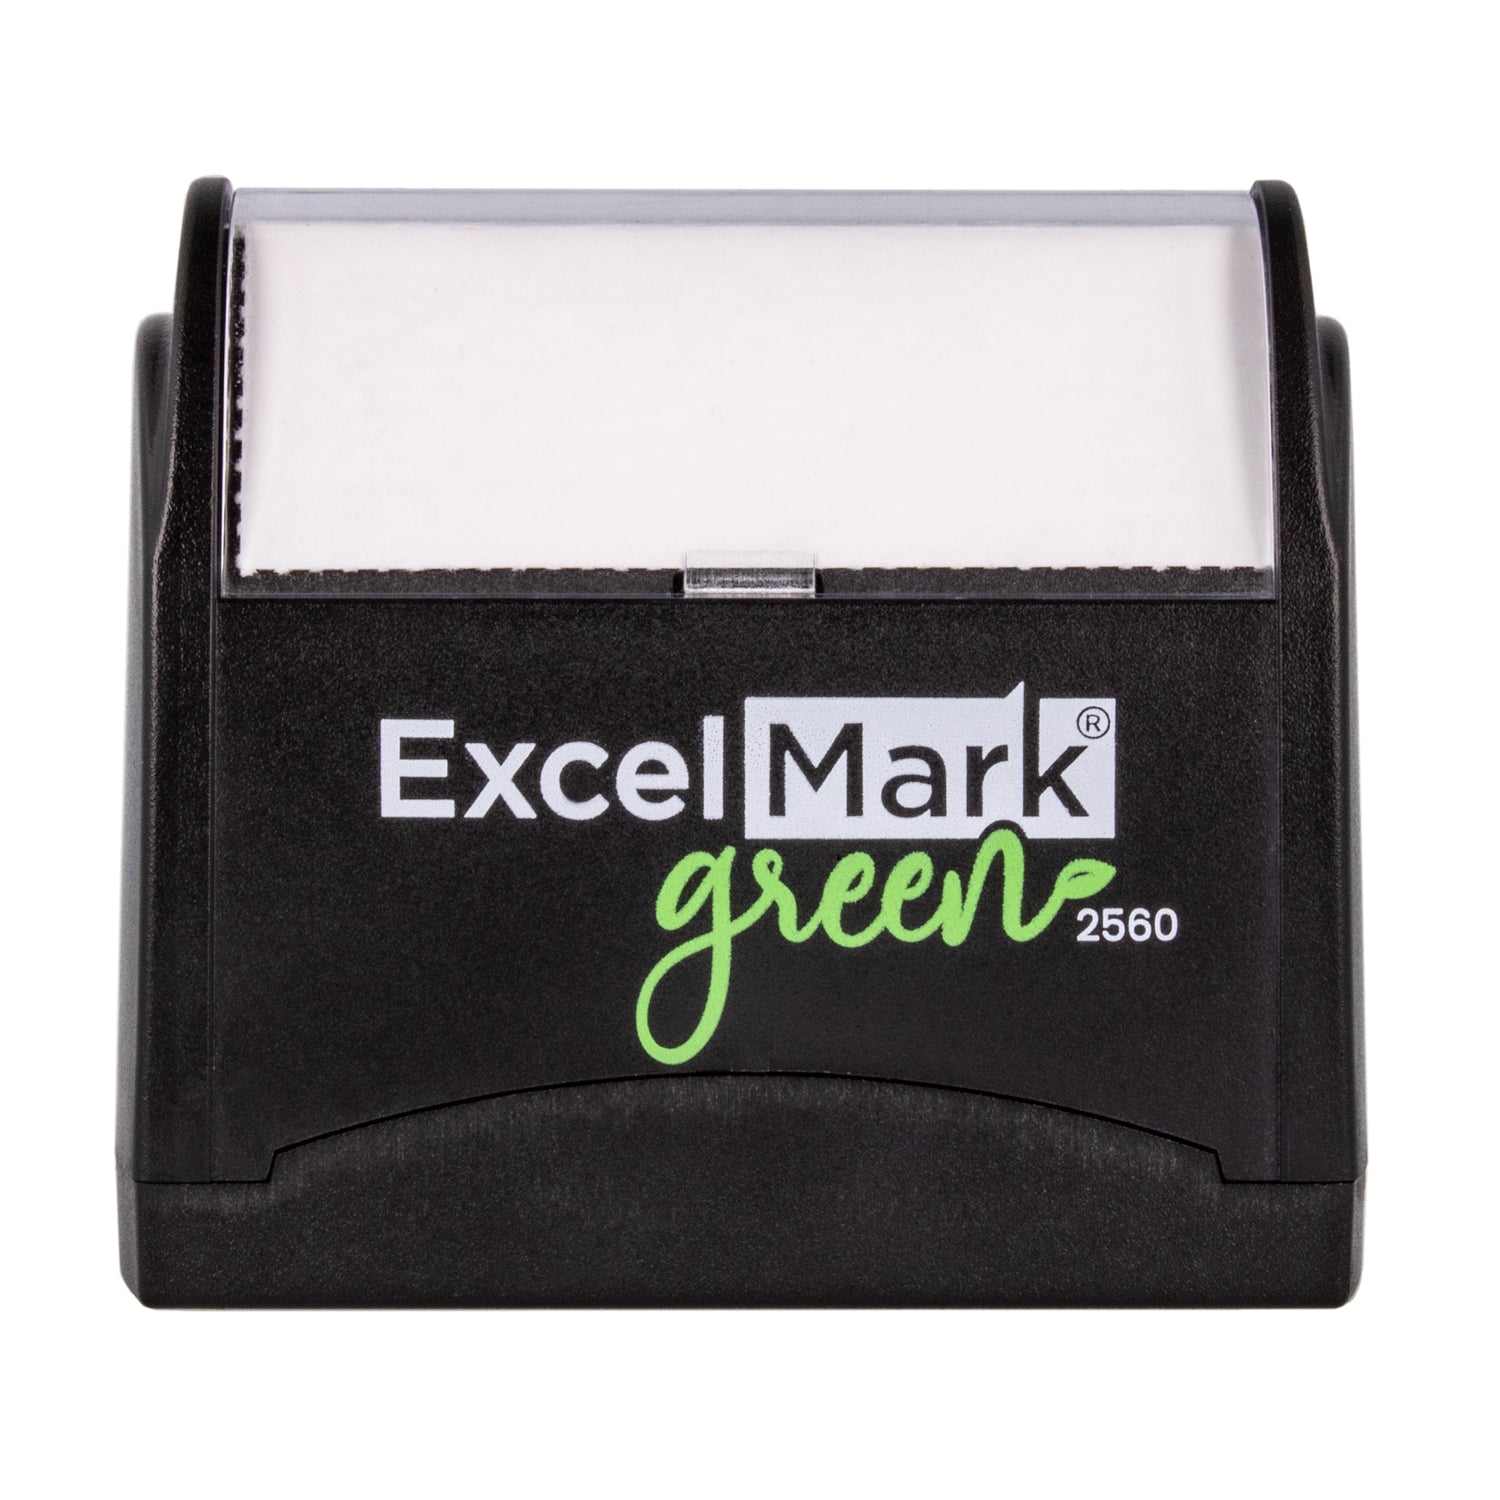 ExcelMark Green 2560 Pre-Inked Stamp